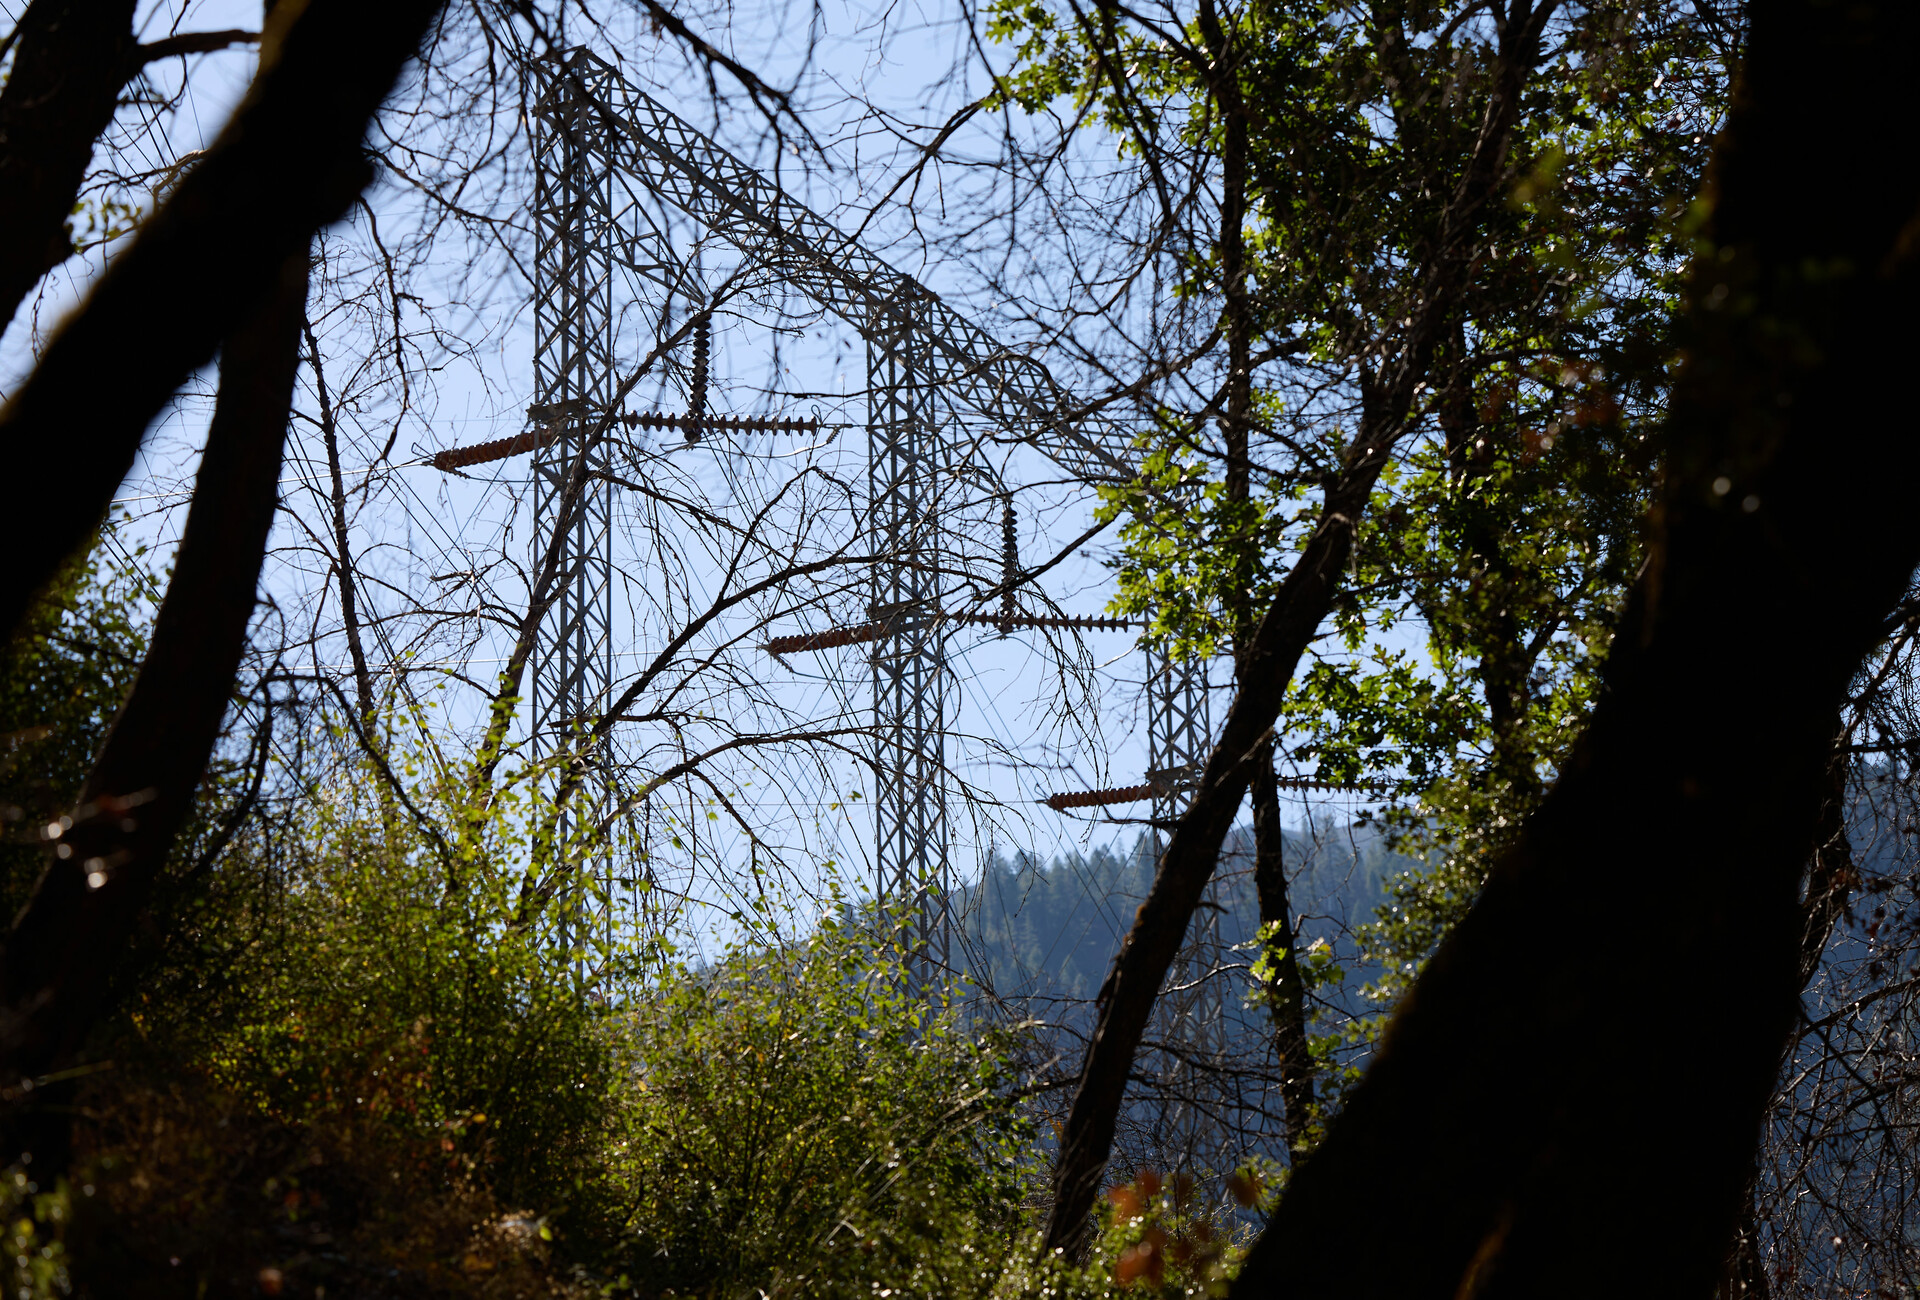 Powerlines are seen through thick trees.